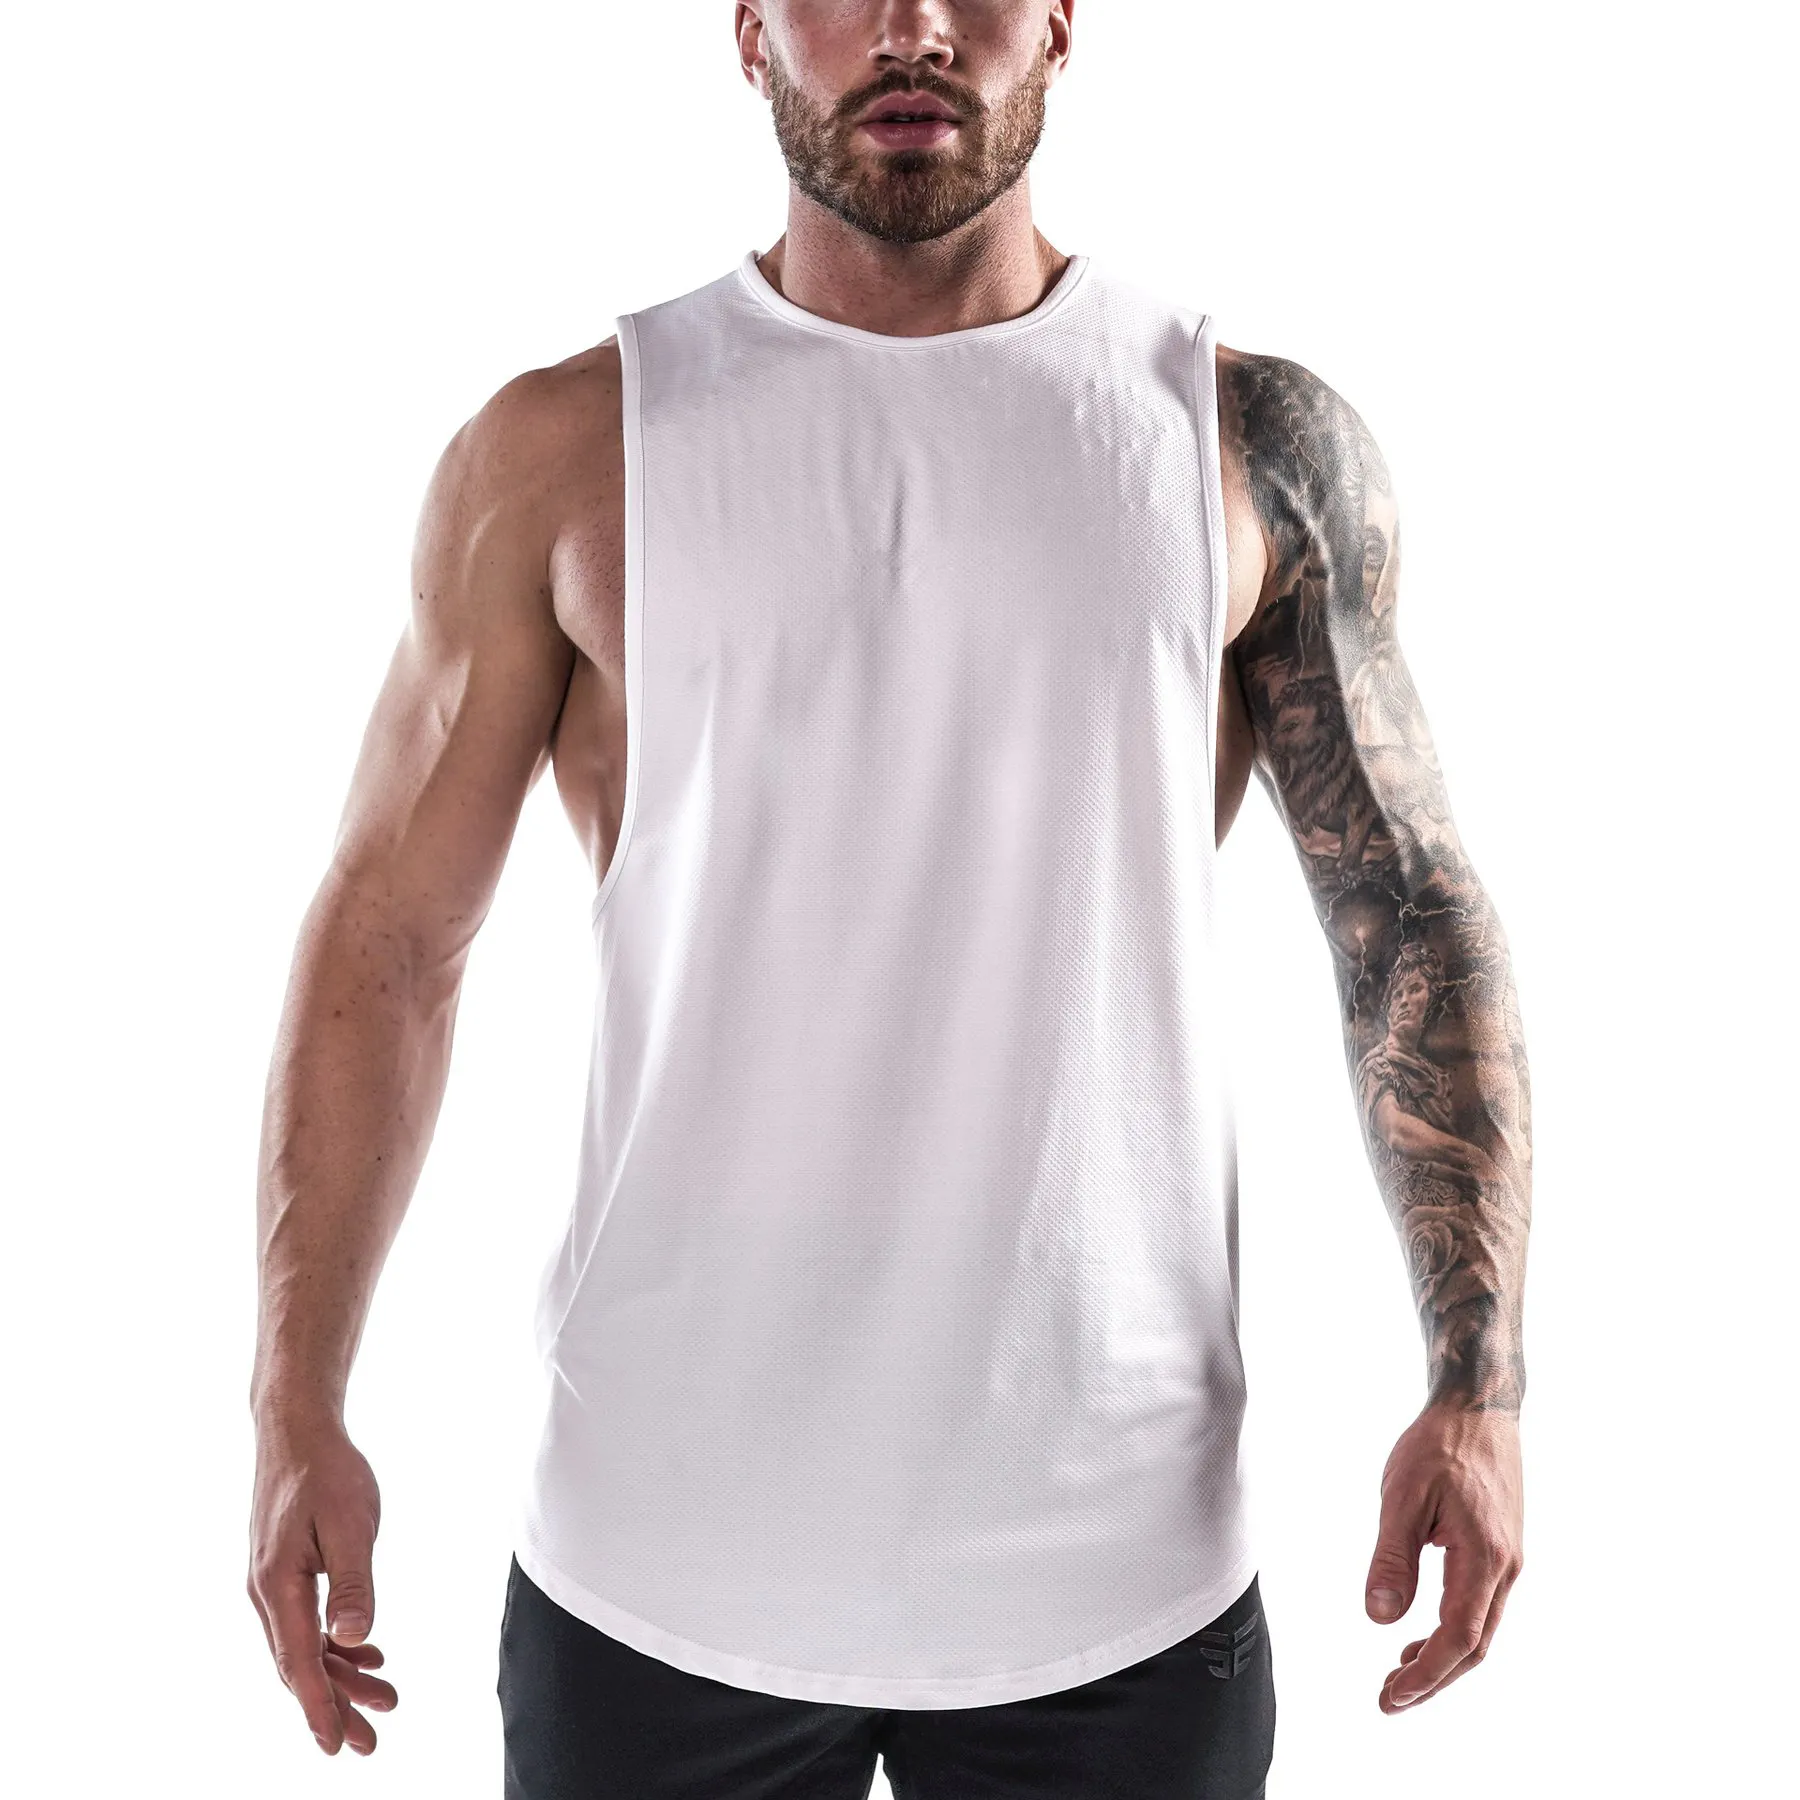 sustainable mens tanktop comfortable yoga tops OEM services cotton tank tops plus size street wear party wear singlets